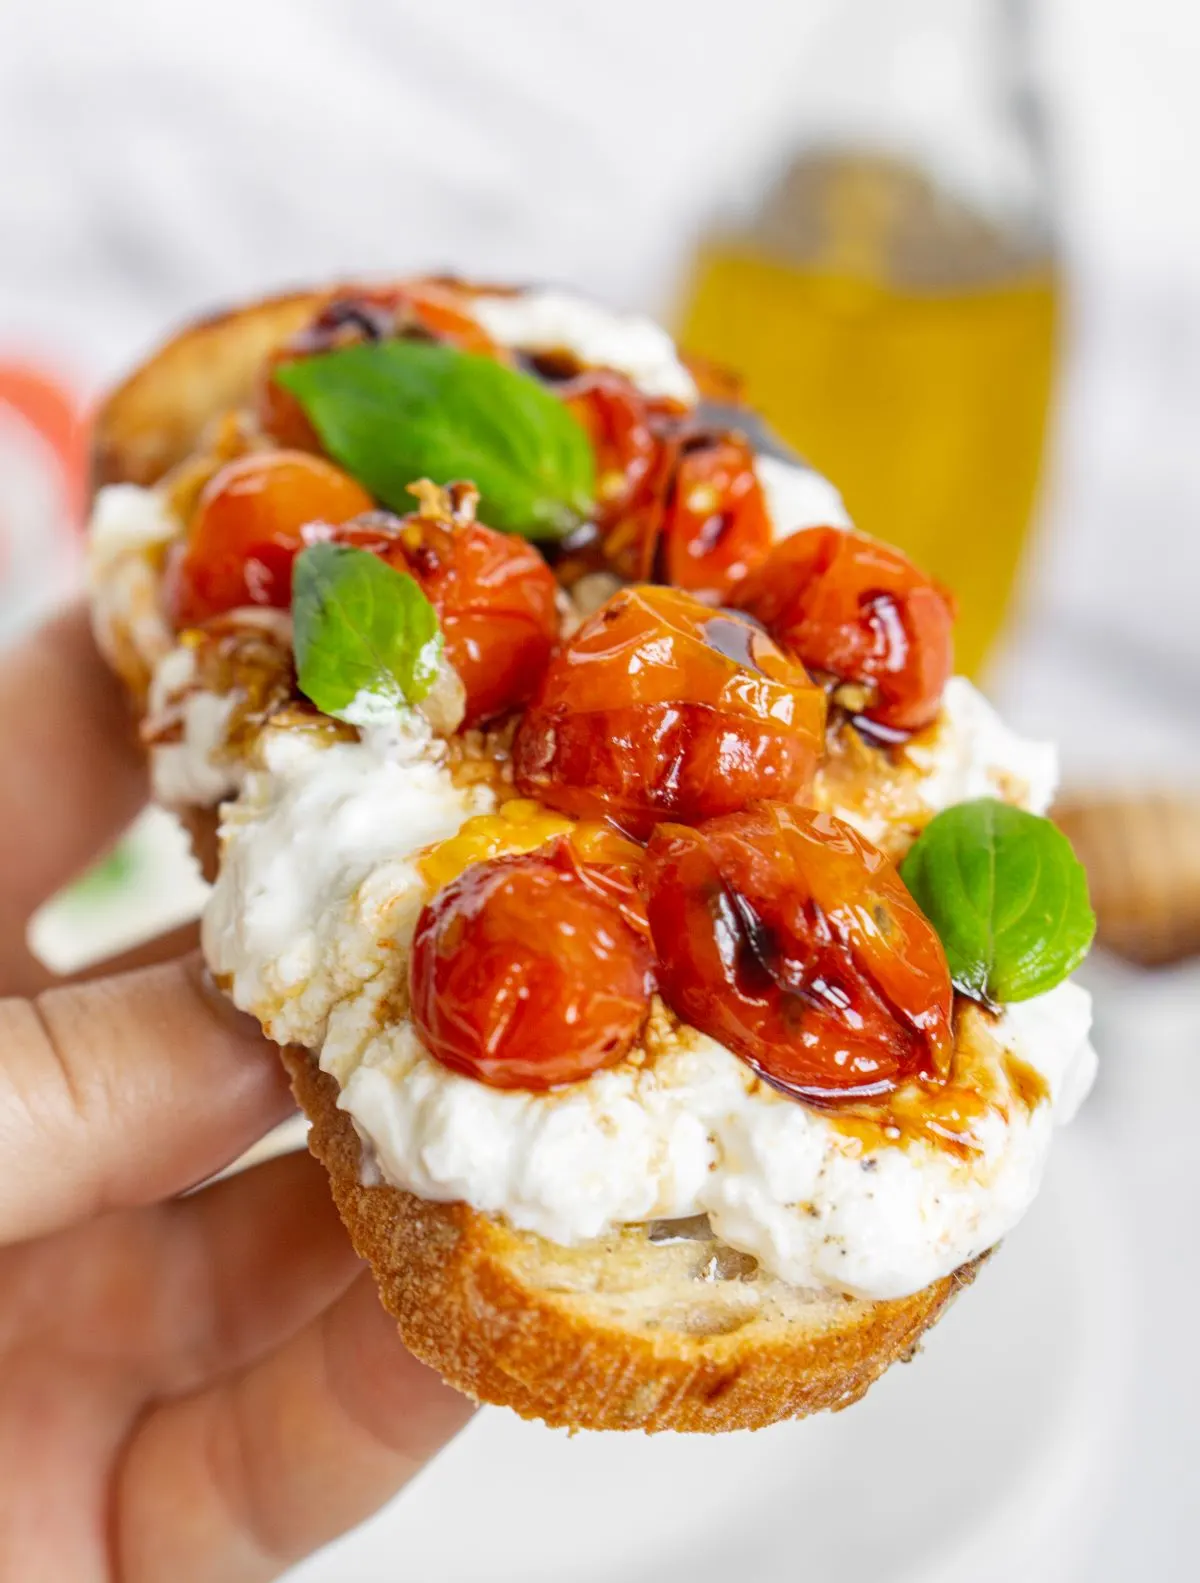 Hand holding burrata toast with blistered tomatoes and crispy garlic